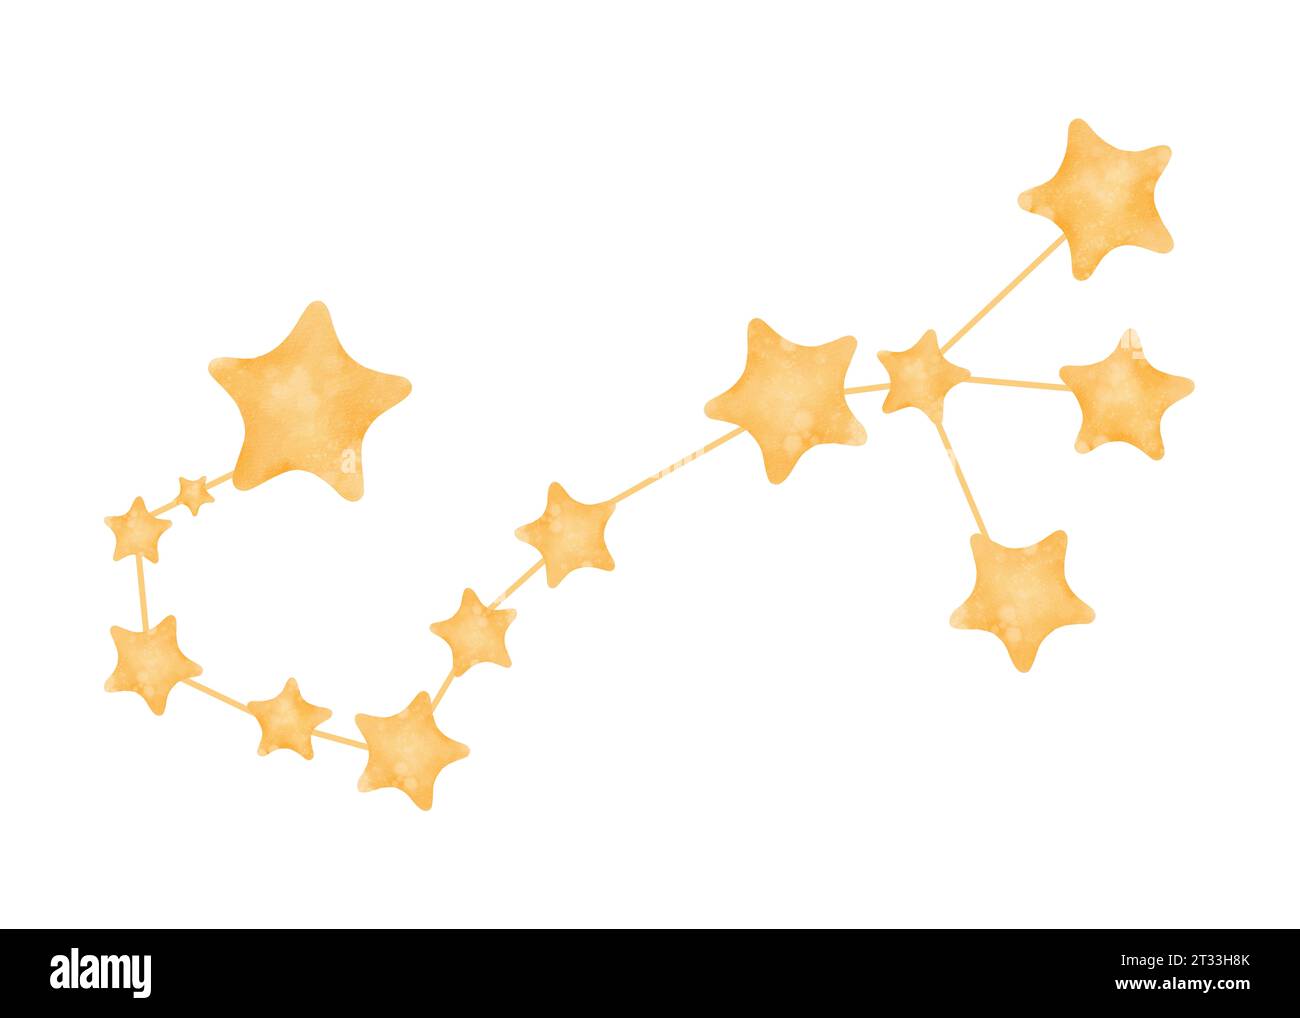 Watercolor Isolated Illustration of the Scorpio Constellation, a Zodiac Sign. Luminous Stars Formed into a Constellation Scheme for Astronomy. for Stock Photo